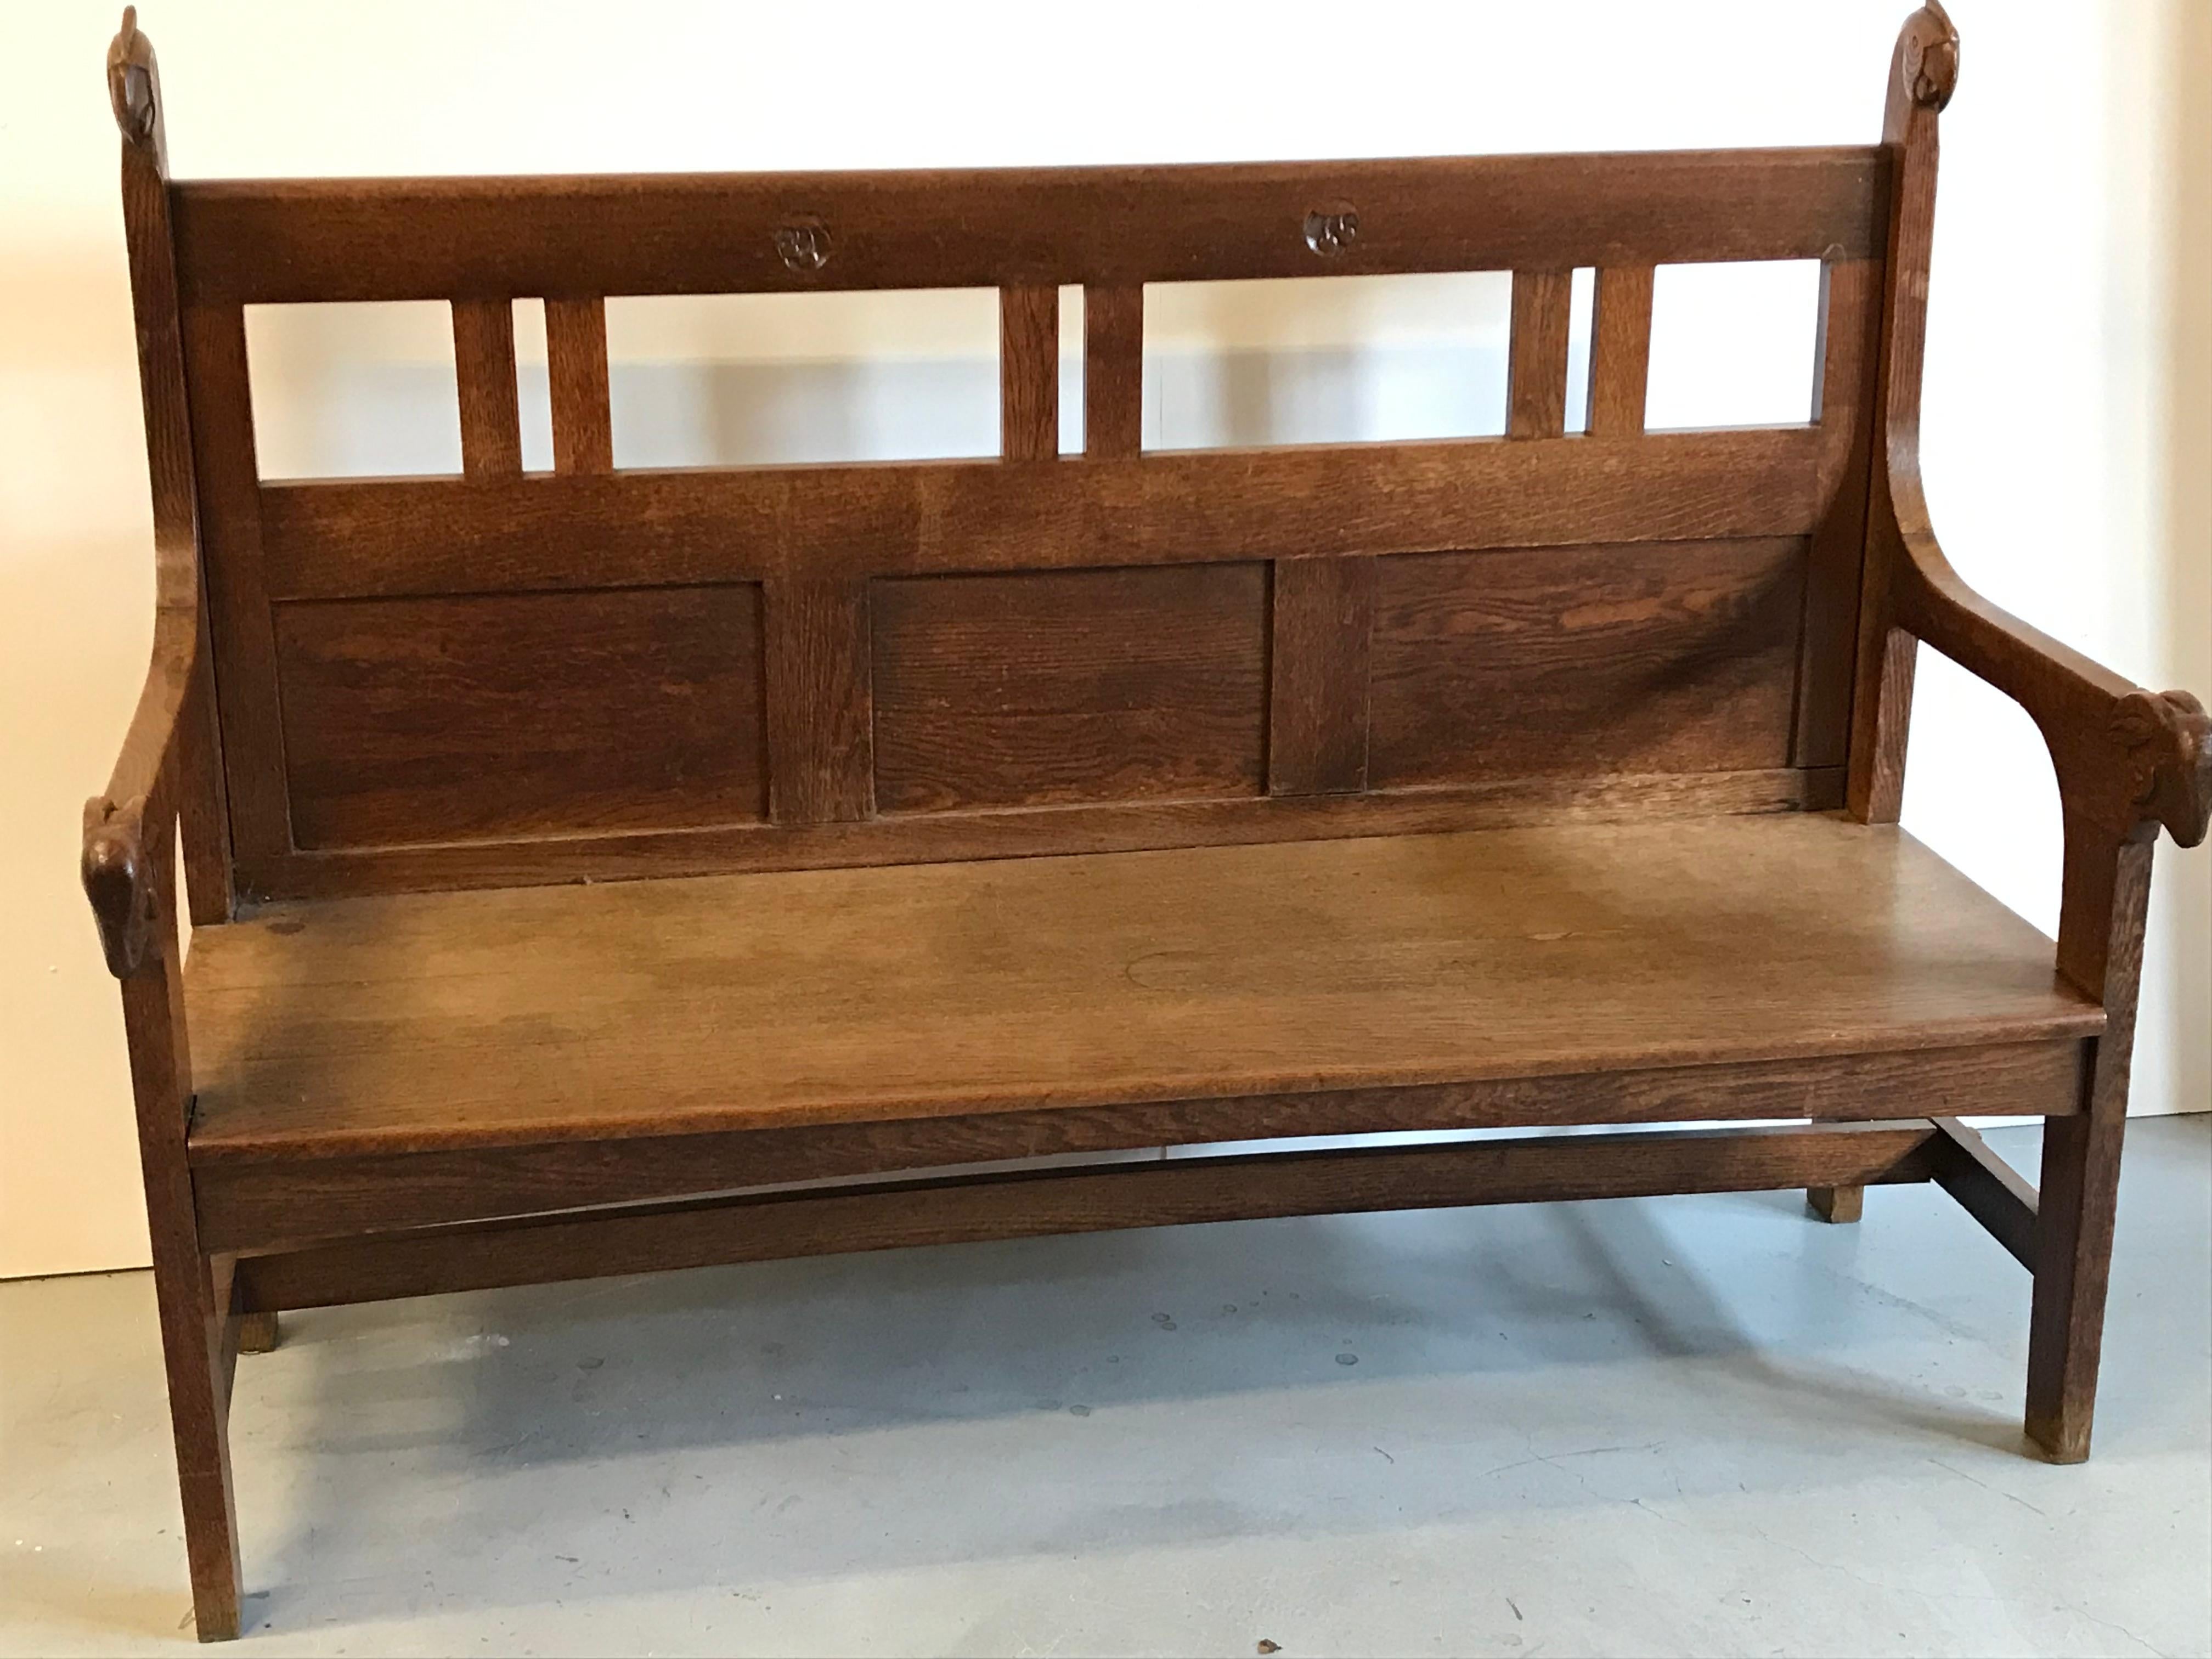 A wonderful piece of furniture by famous Dutch artist Kobus de Graaff (1967-1936).
De Graaff worked in ‘t Gooi and Amsterdam as an artist, furniture maker and sculptor. He also did ceramics and specialized in carving bronze and wooden figures such